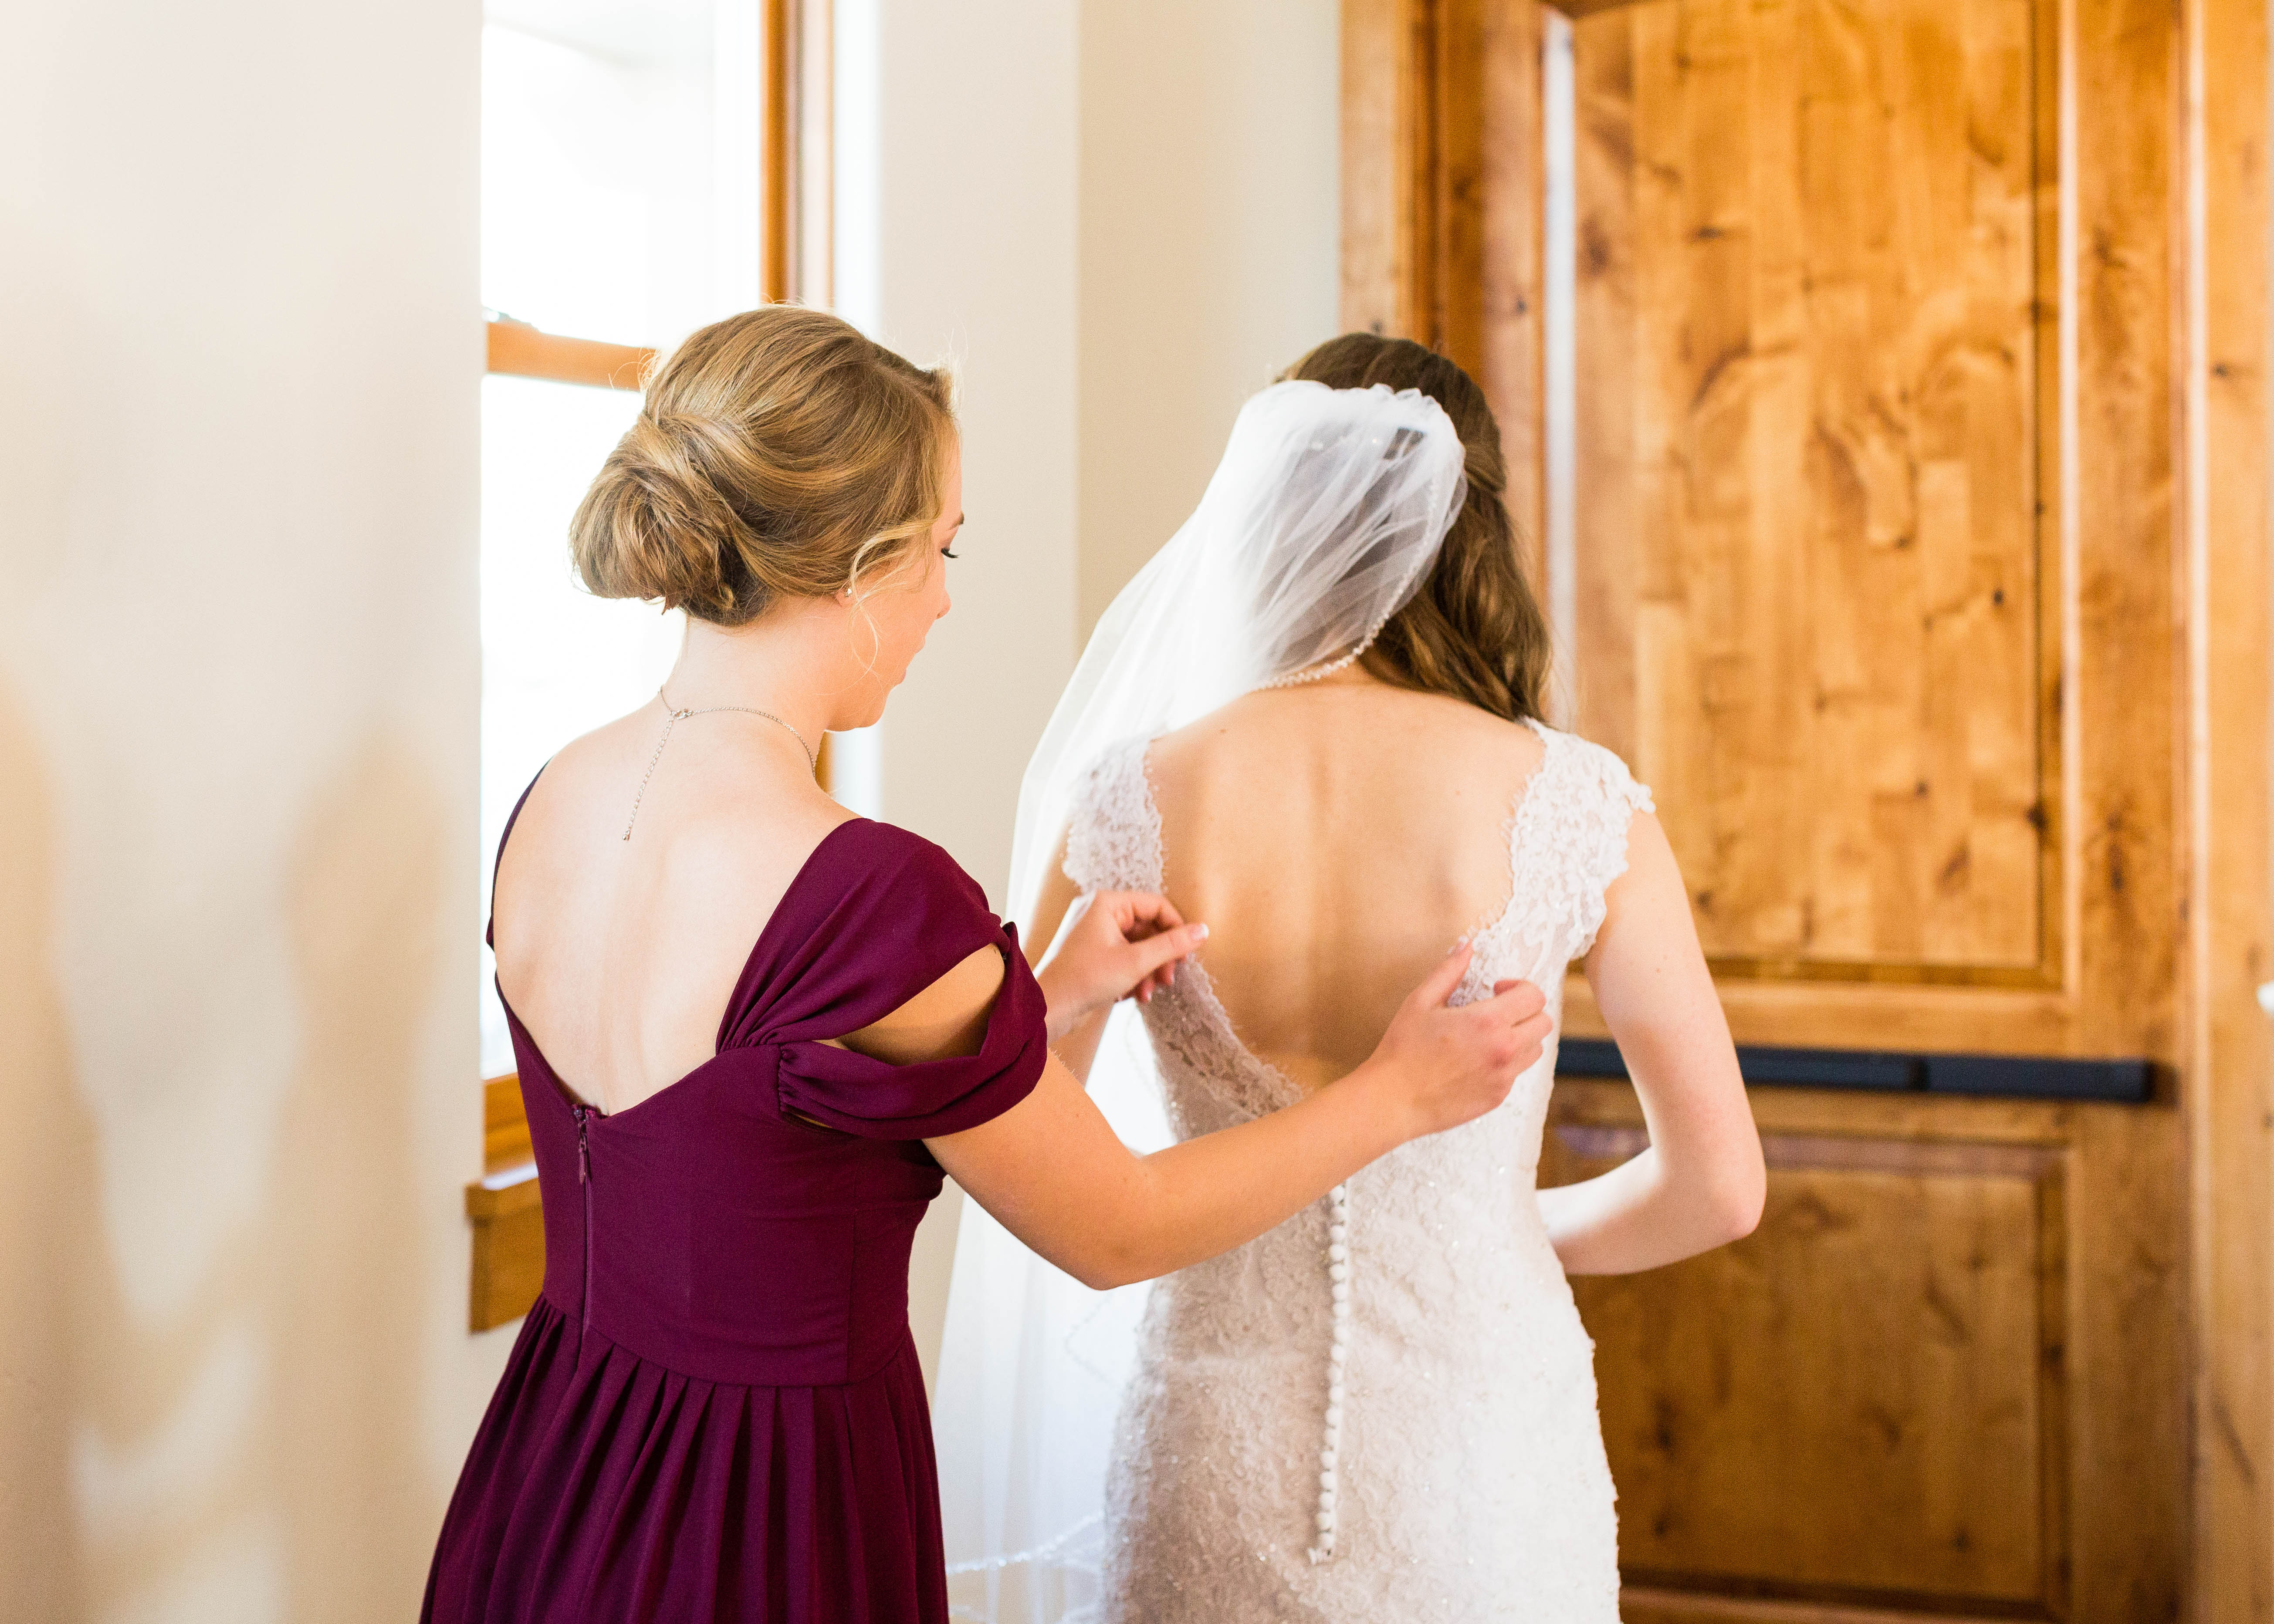 Maid of Honor adjusts the back of the Bride's romantic beaded lace wedding dress